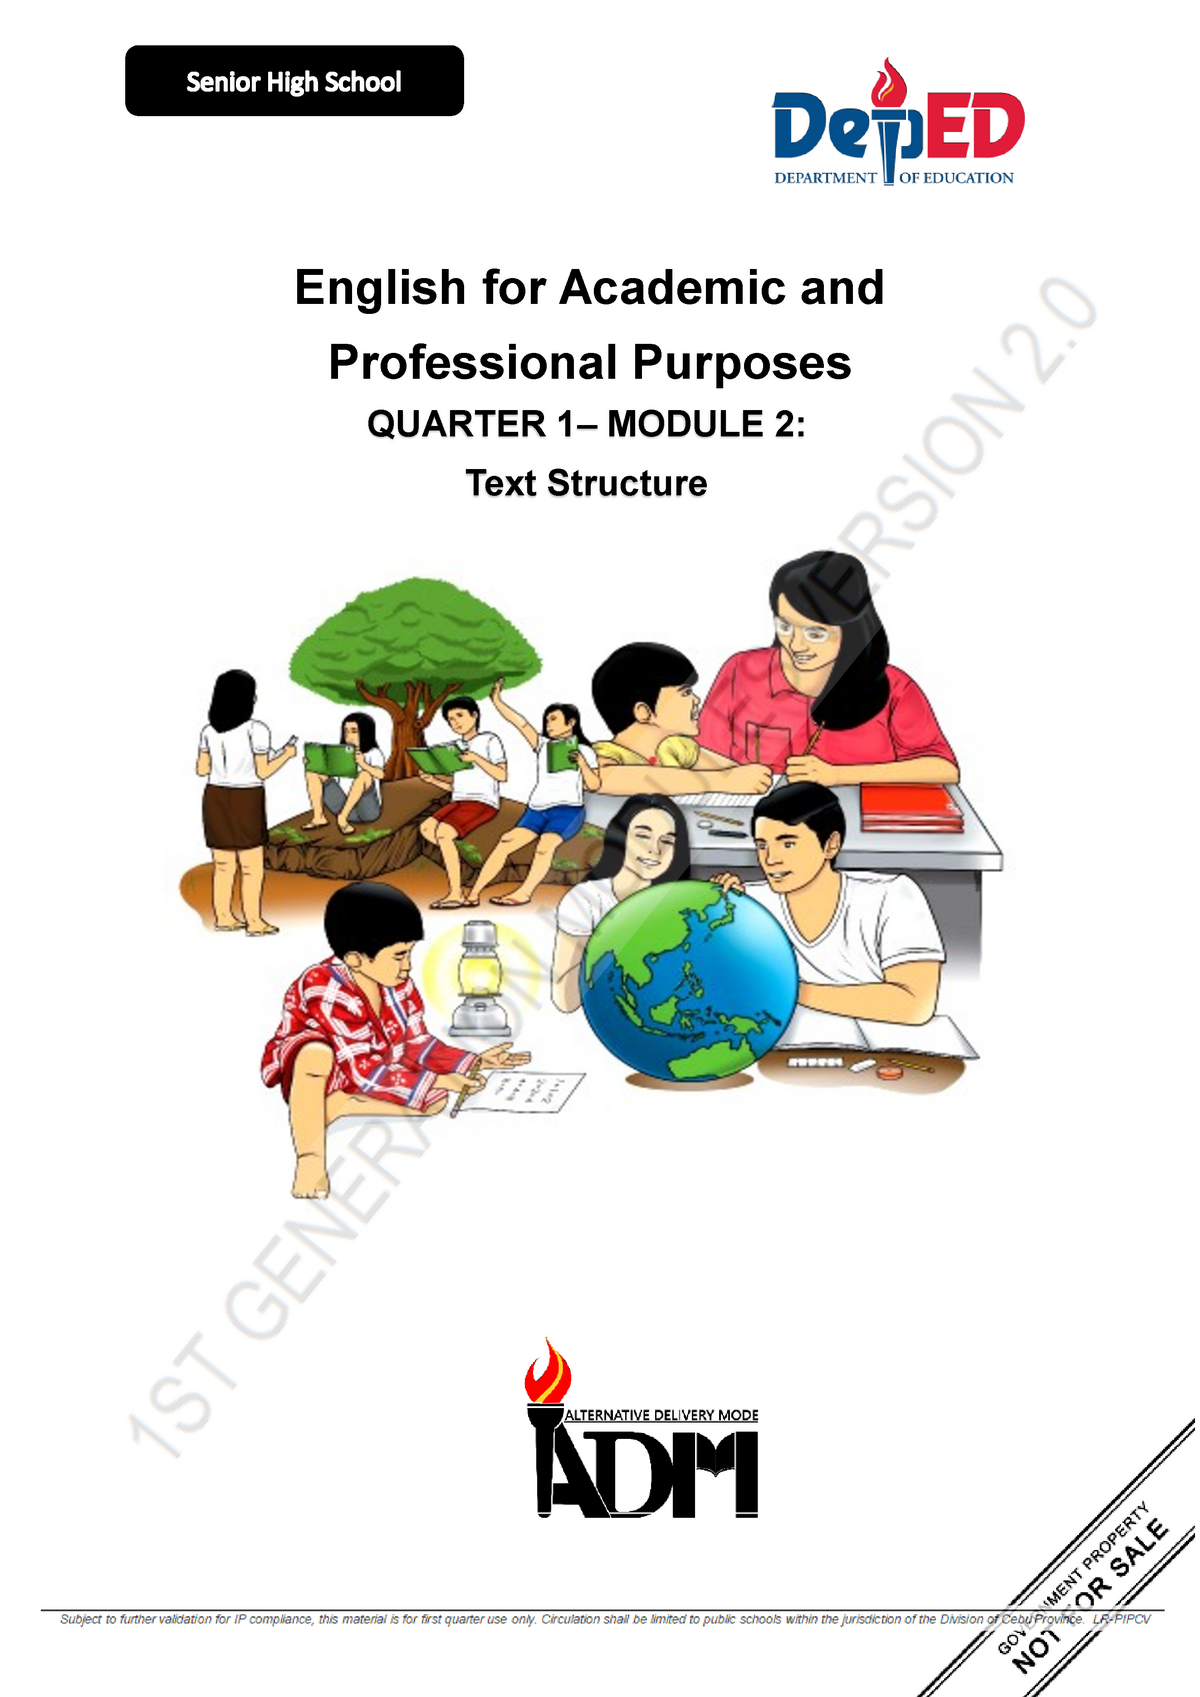 Eapp Module 2 Module Psychology English For Academic And Professional Purposes Quarter 1 6473